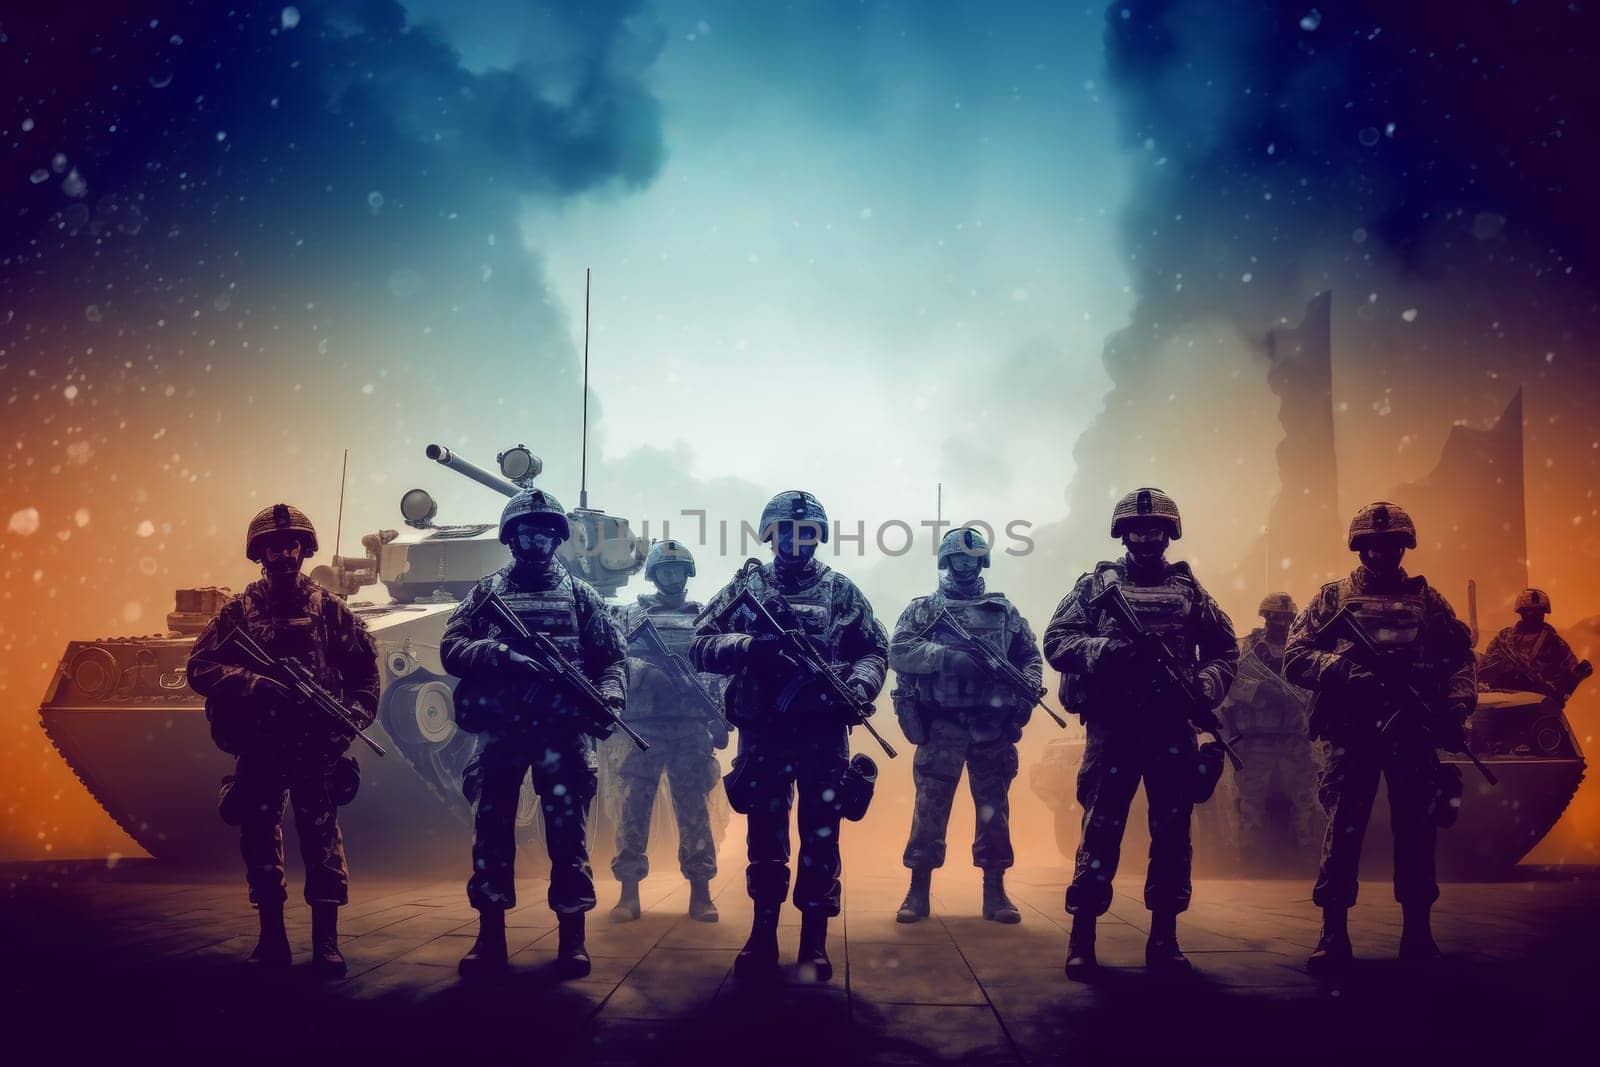 An illustrative image of NATO soldiers in formation with military tanks, under a symbolic background, representing defense readiness and strategic forces.